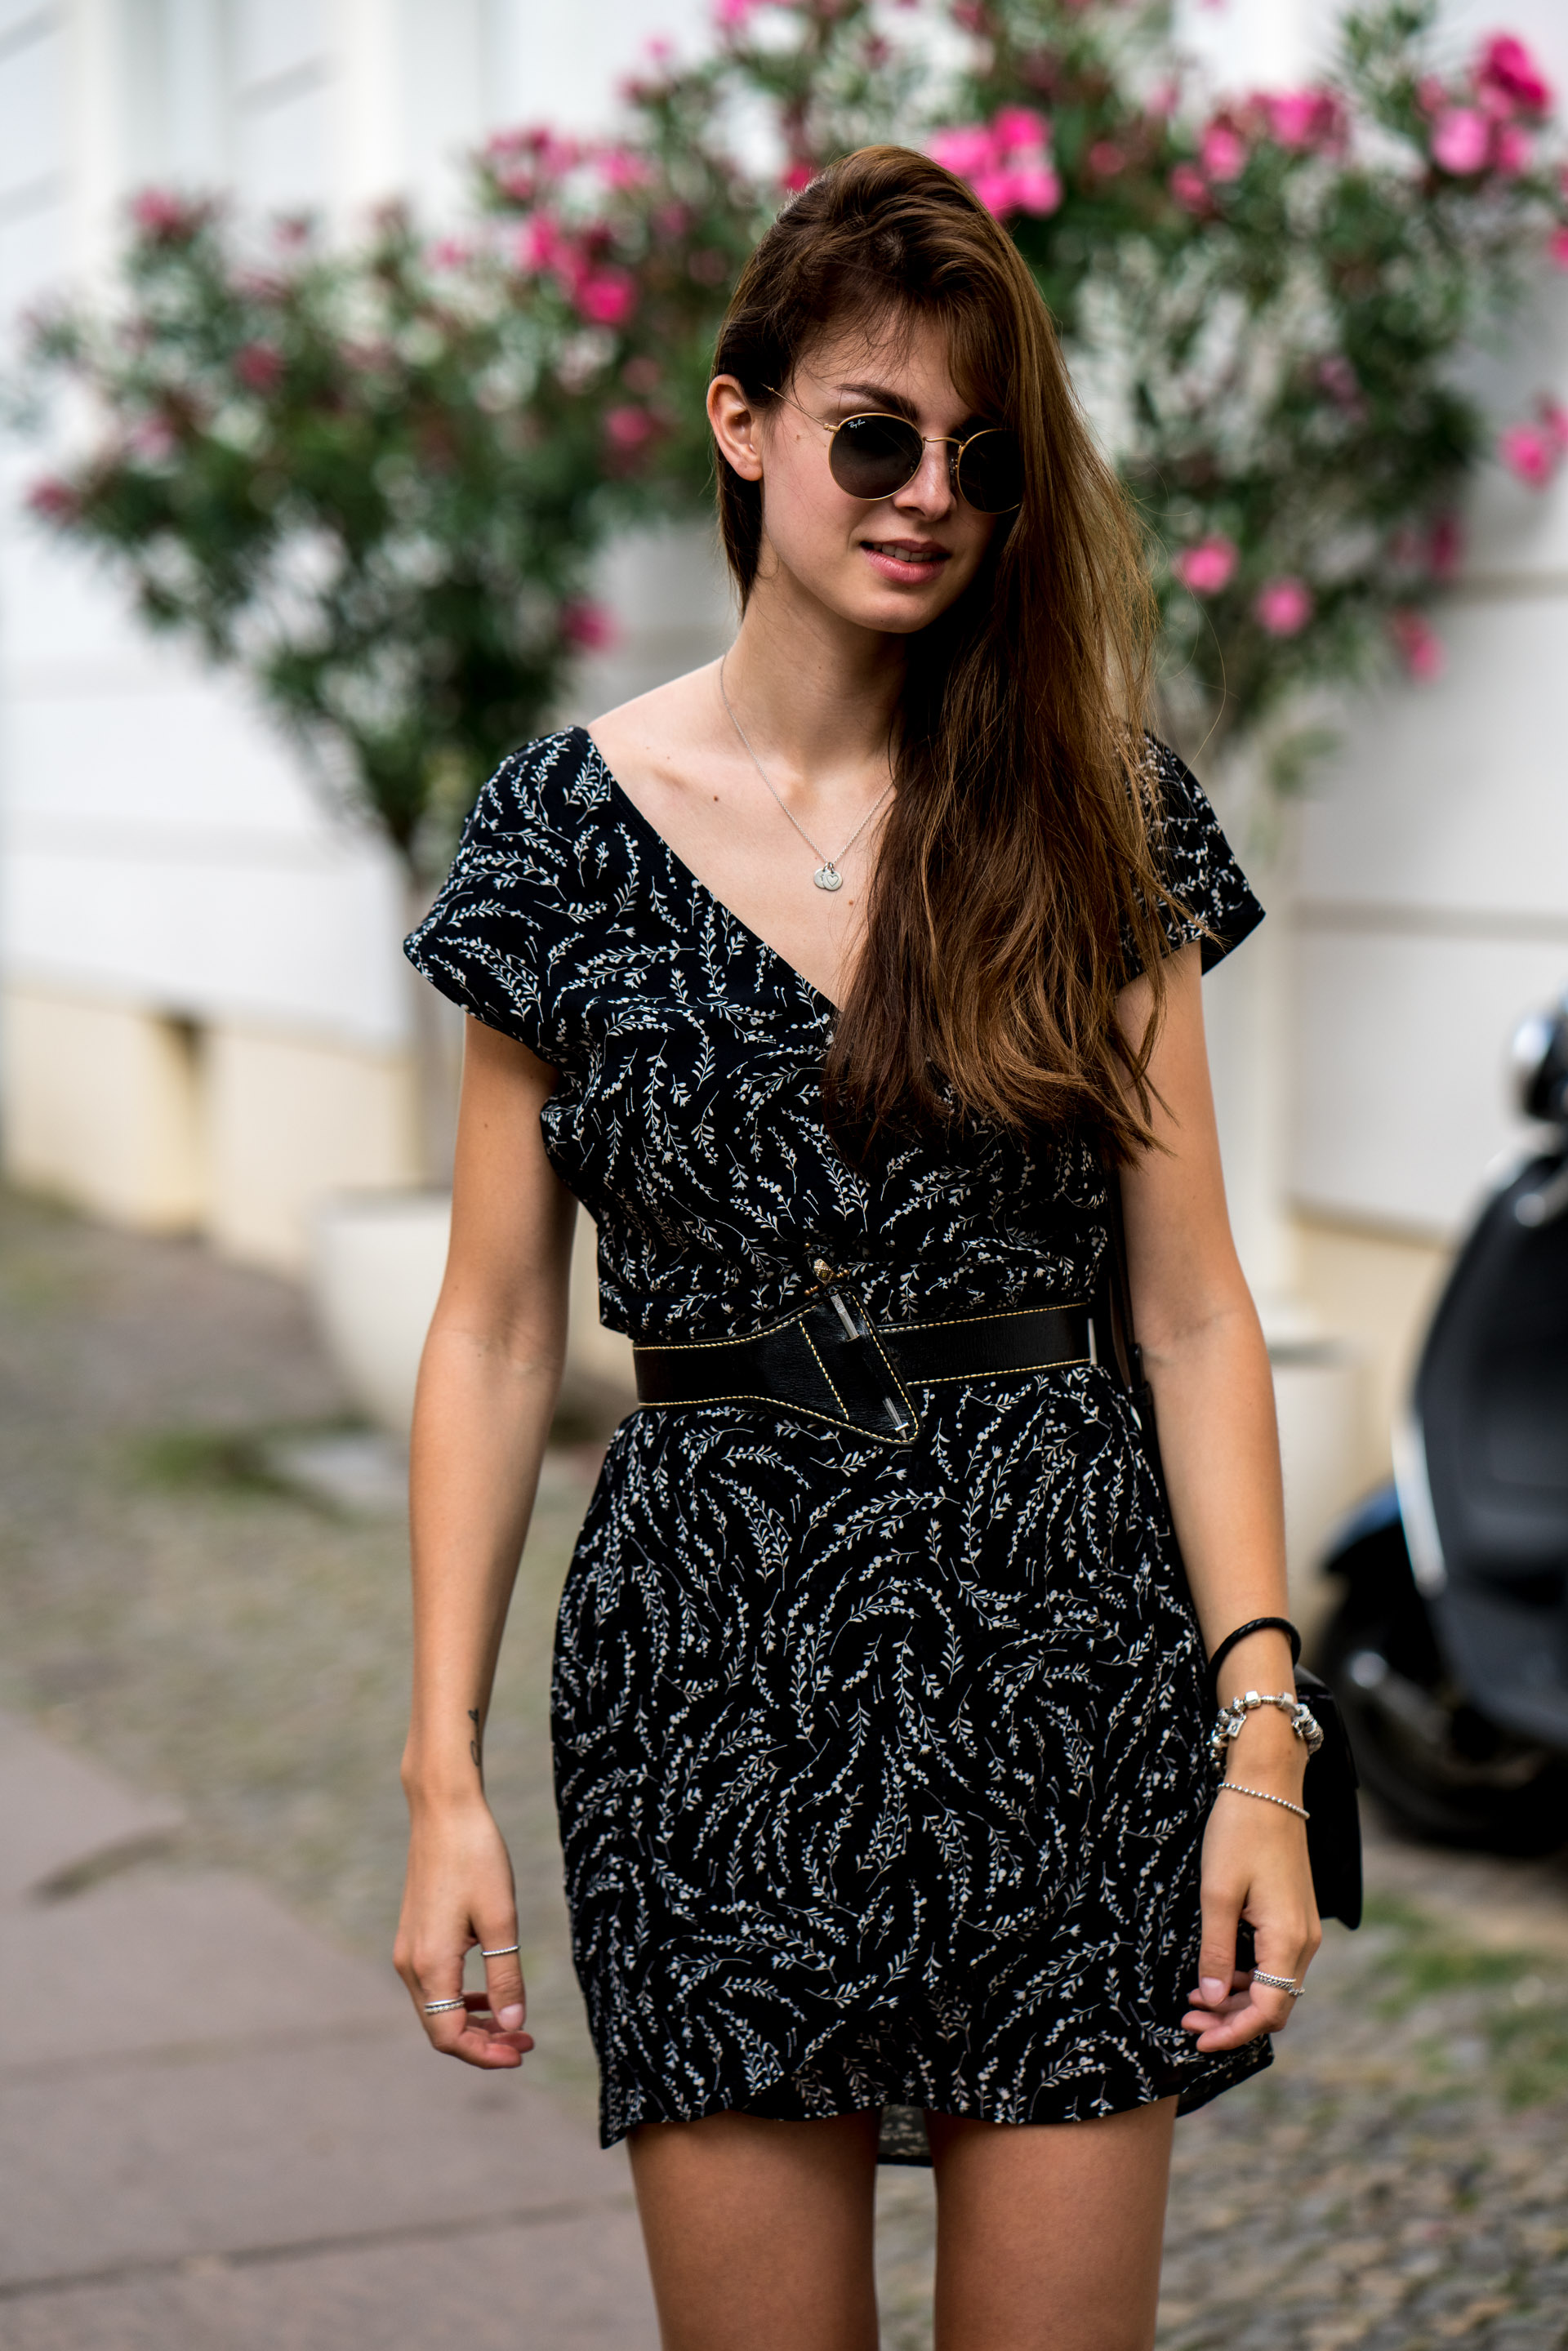 Combining summer dresses with black boots || Fashionblog Berlin